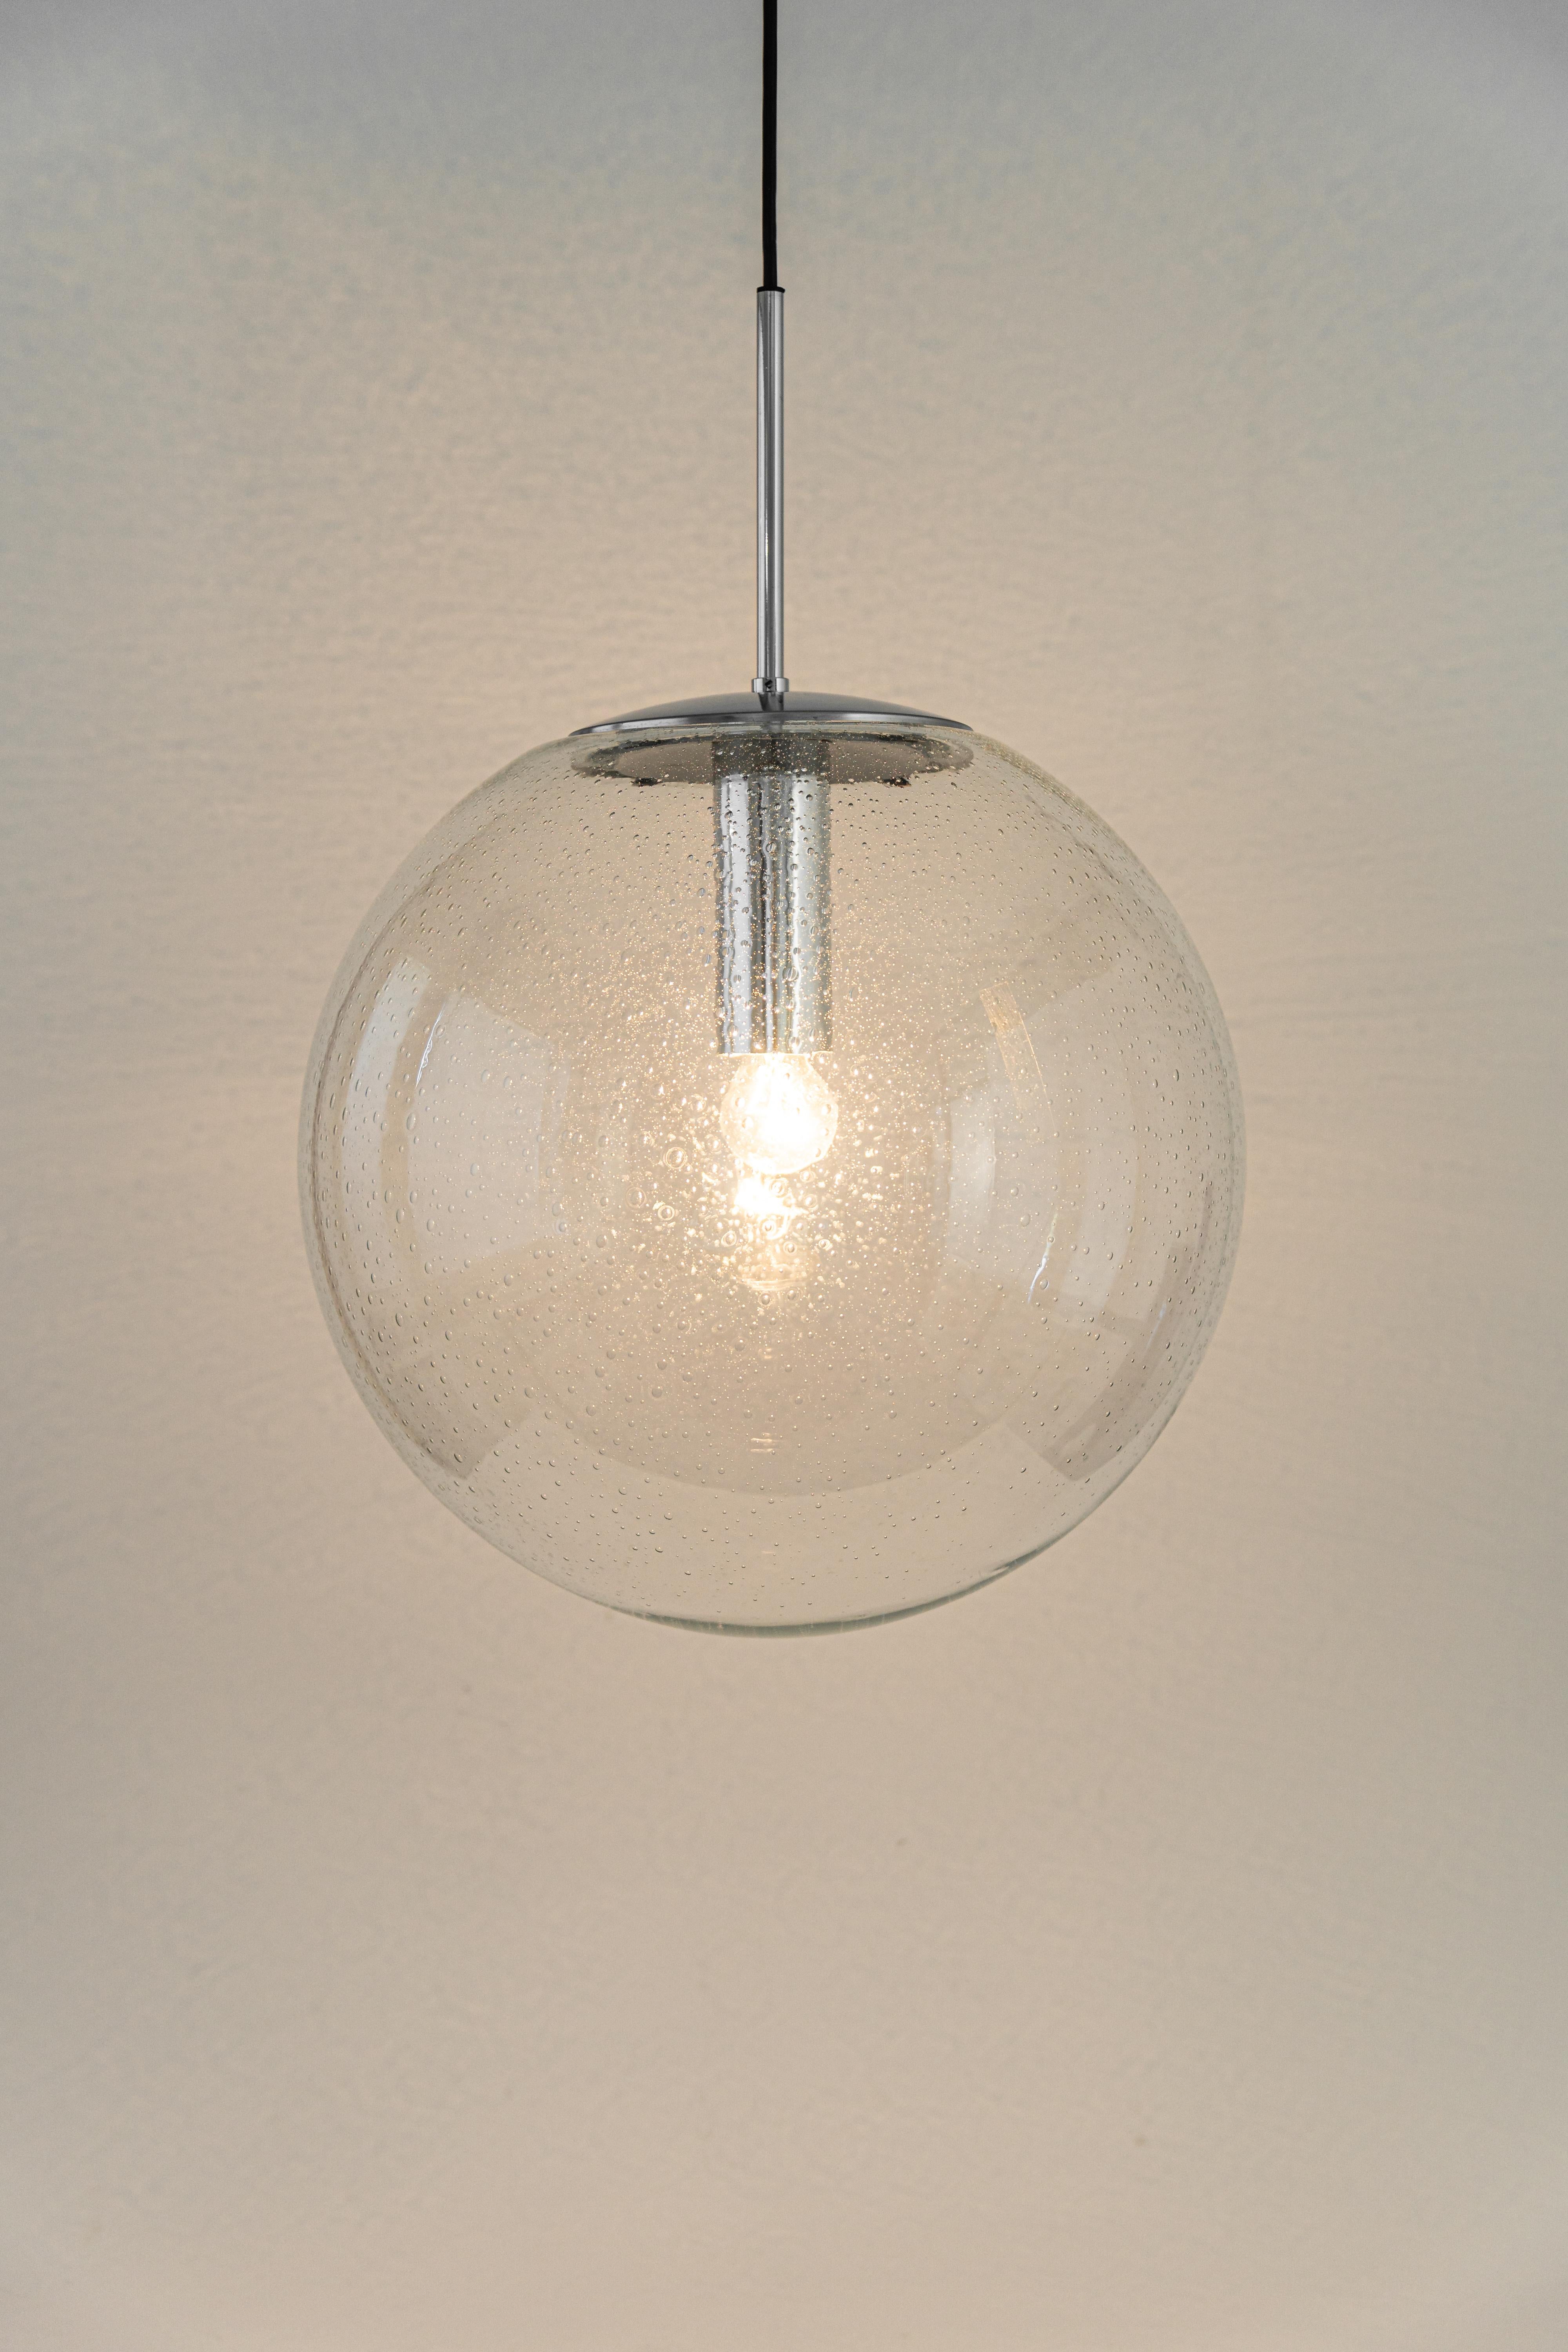 1 of 2 large glass ball pendants, manufactured by Limburg, Germany, circa 1970-1979.

Sockets: One x E27 standard bulb 
Light bulbs are not included. It is possible to install this fixture in all countries (US, UK, Europe, Asia,